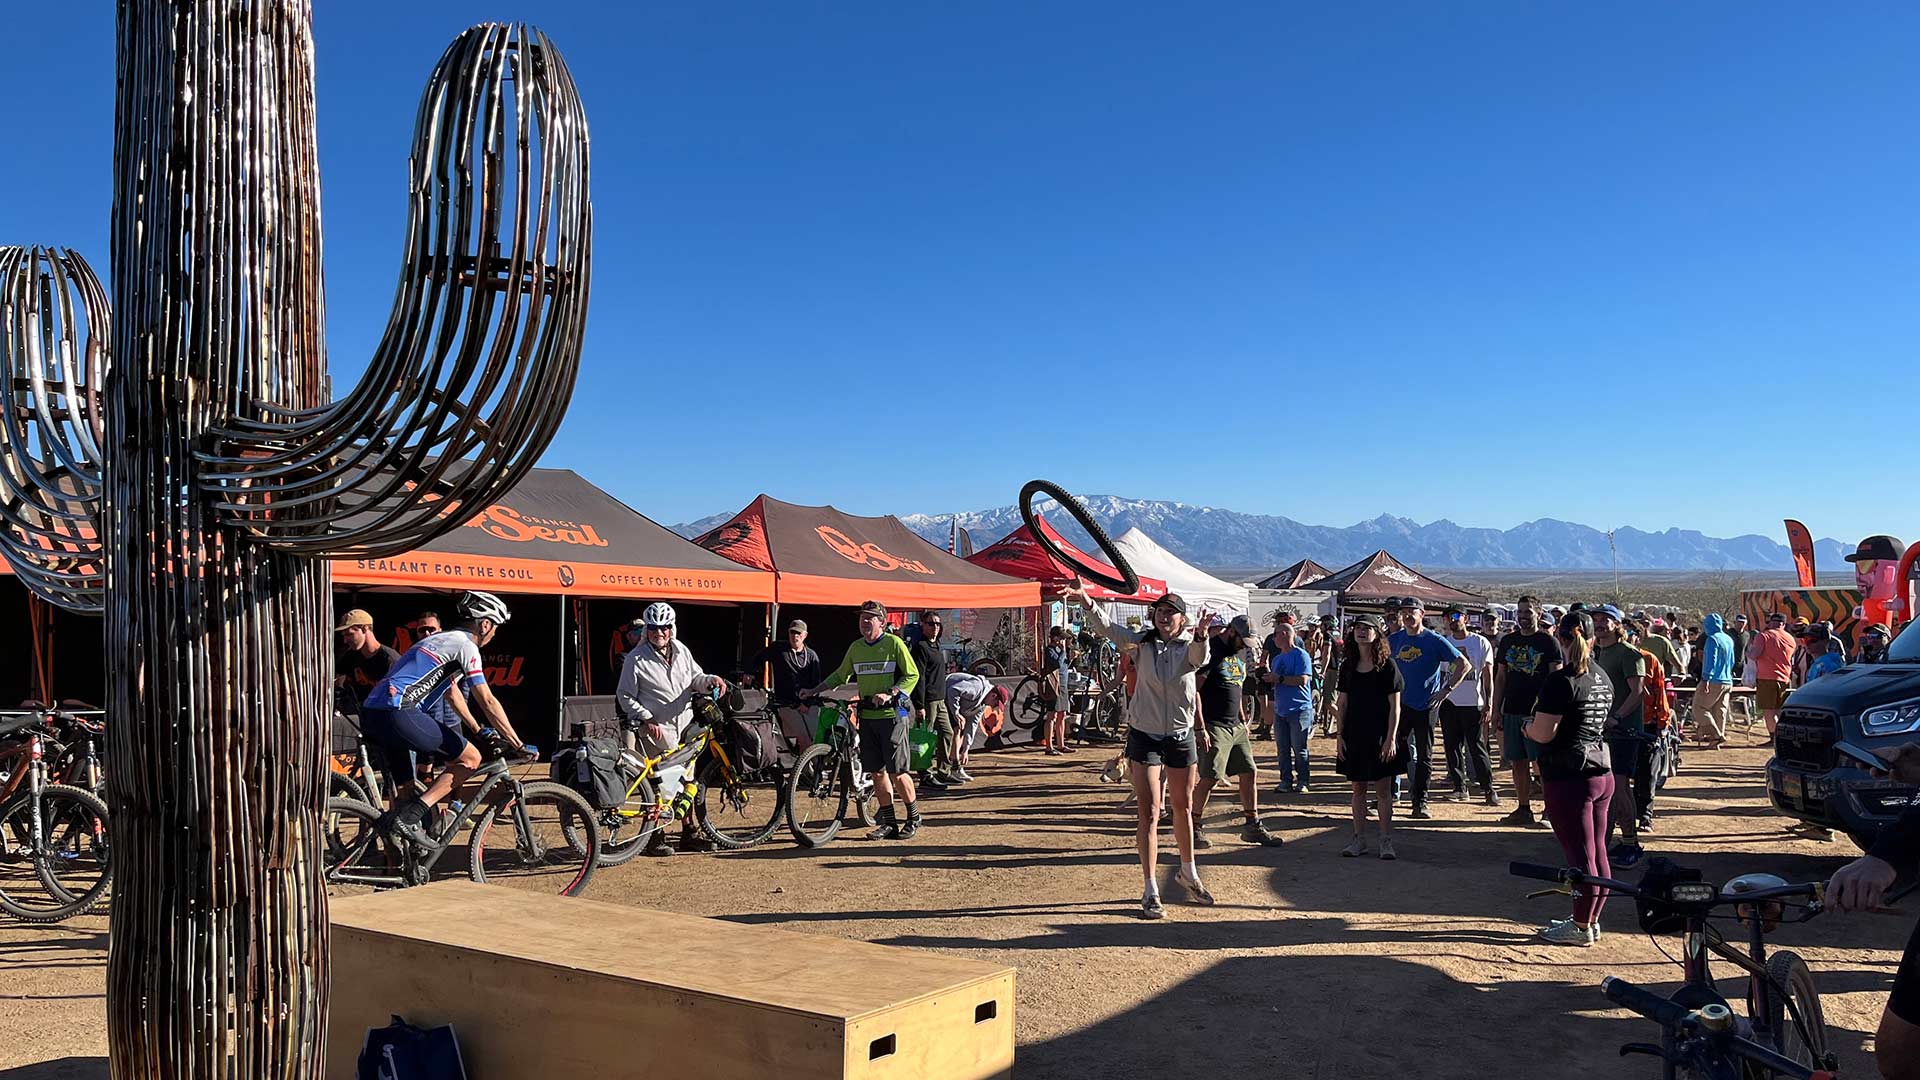 I’m taking this way too seriously as an adult: The growth of mountain biking in Arizona